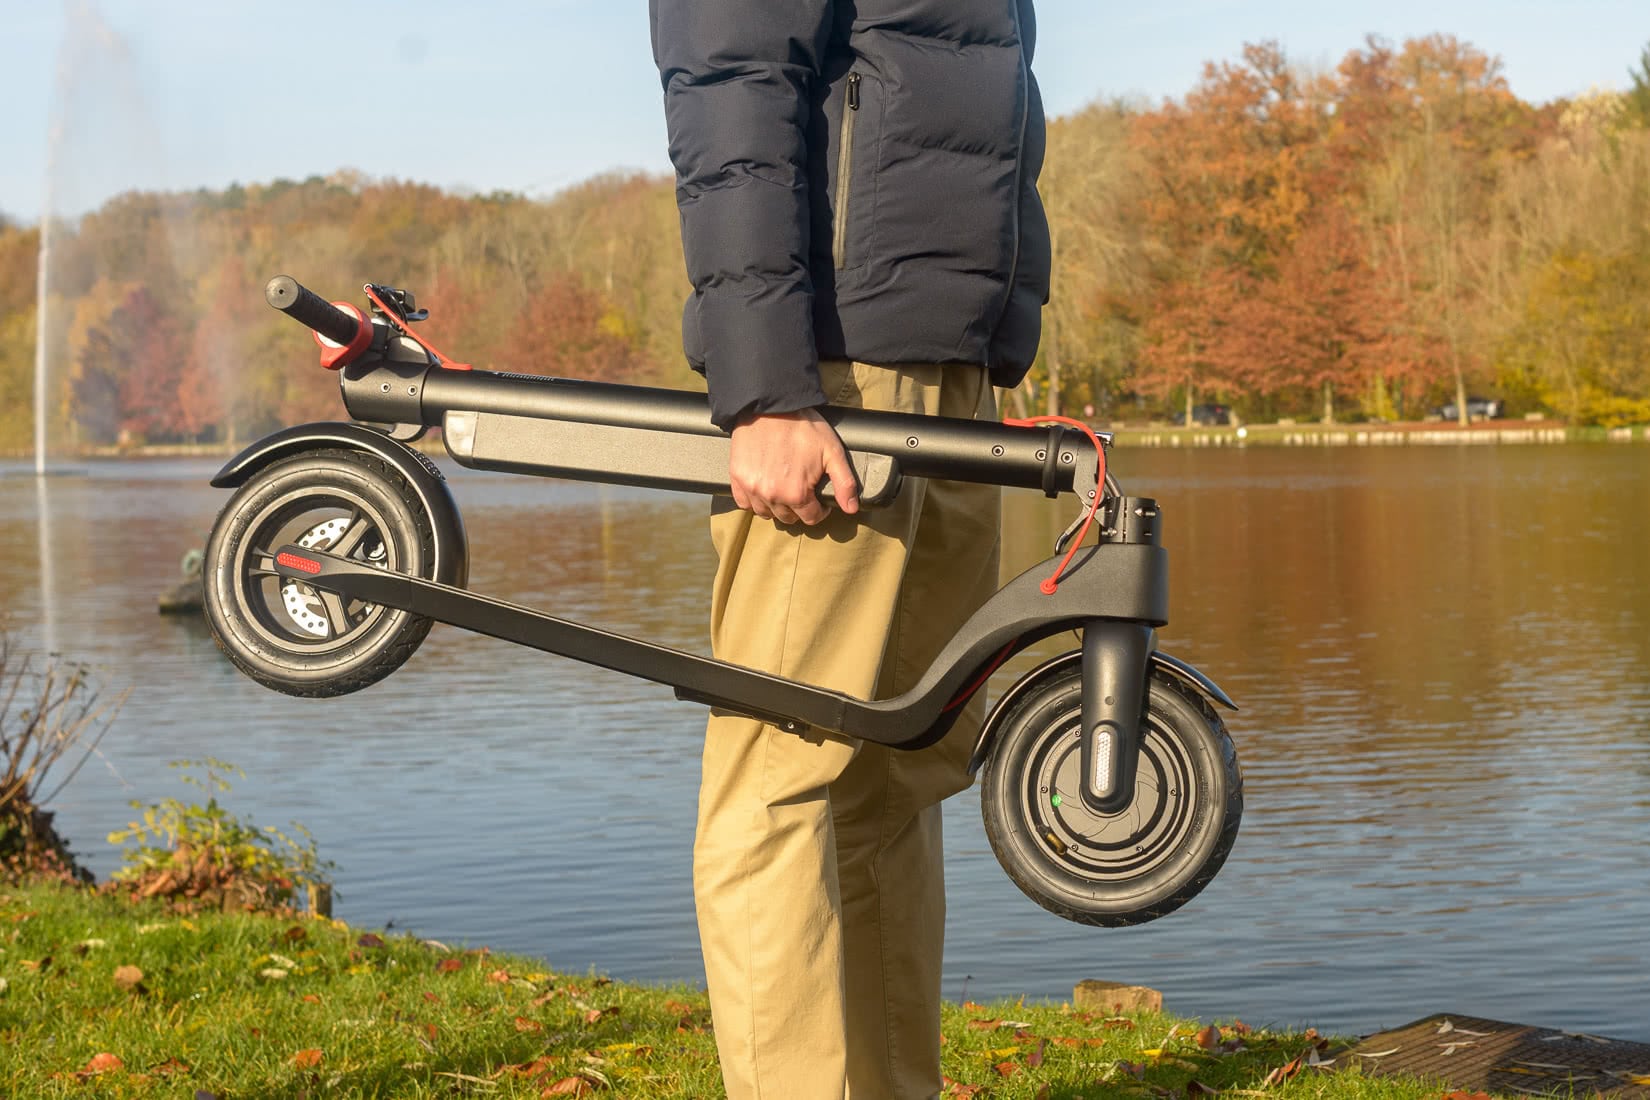 TurboAnt X7 Pro review electric scooter portable - Luxe Digital